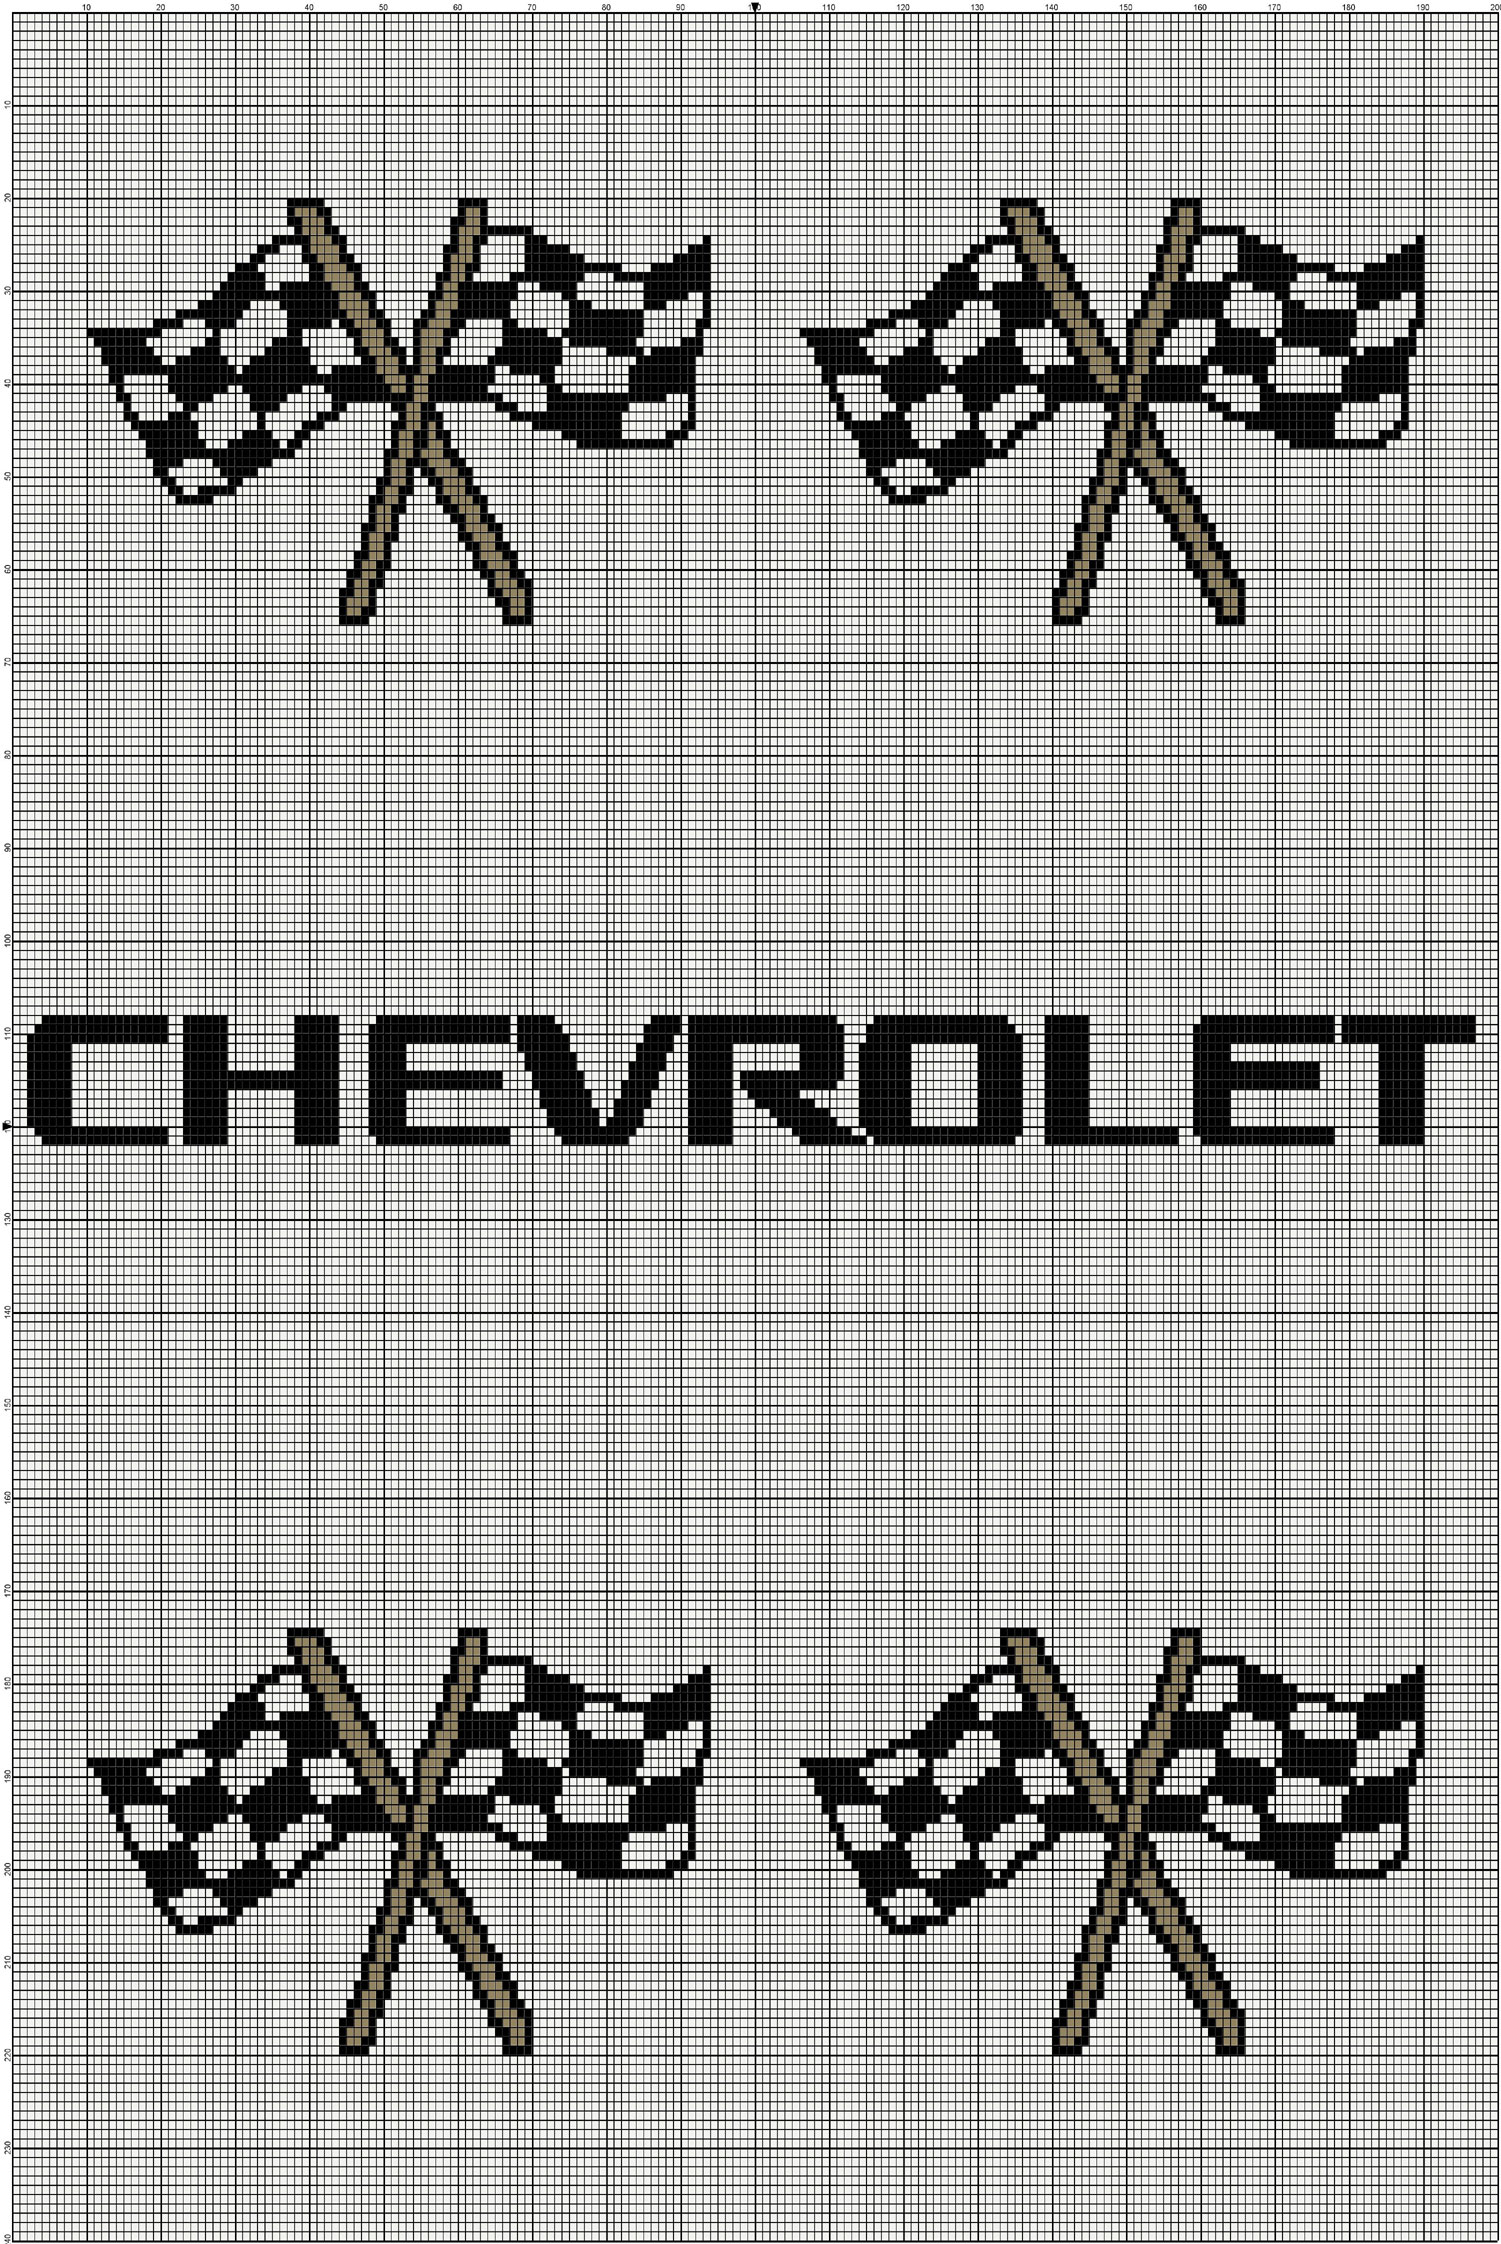 download checkered flag chevy